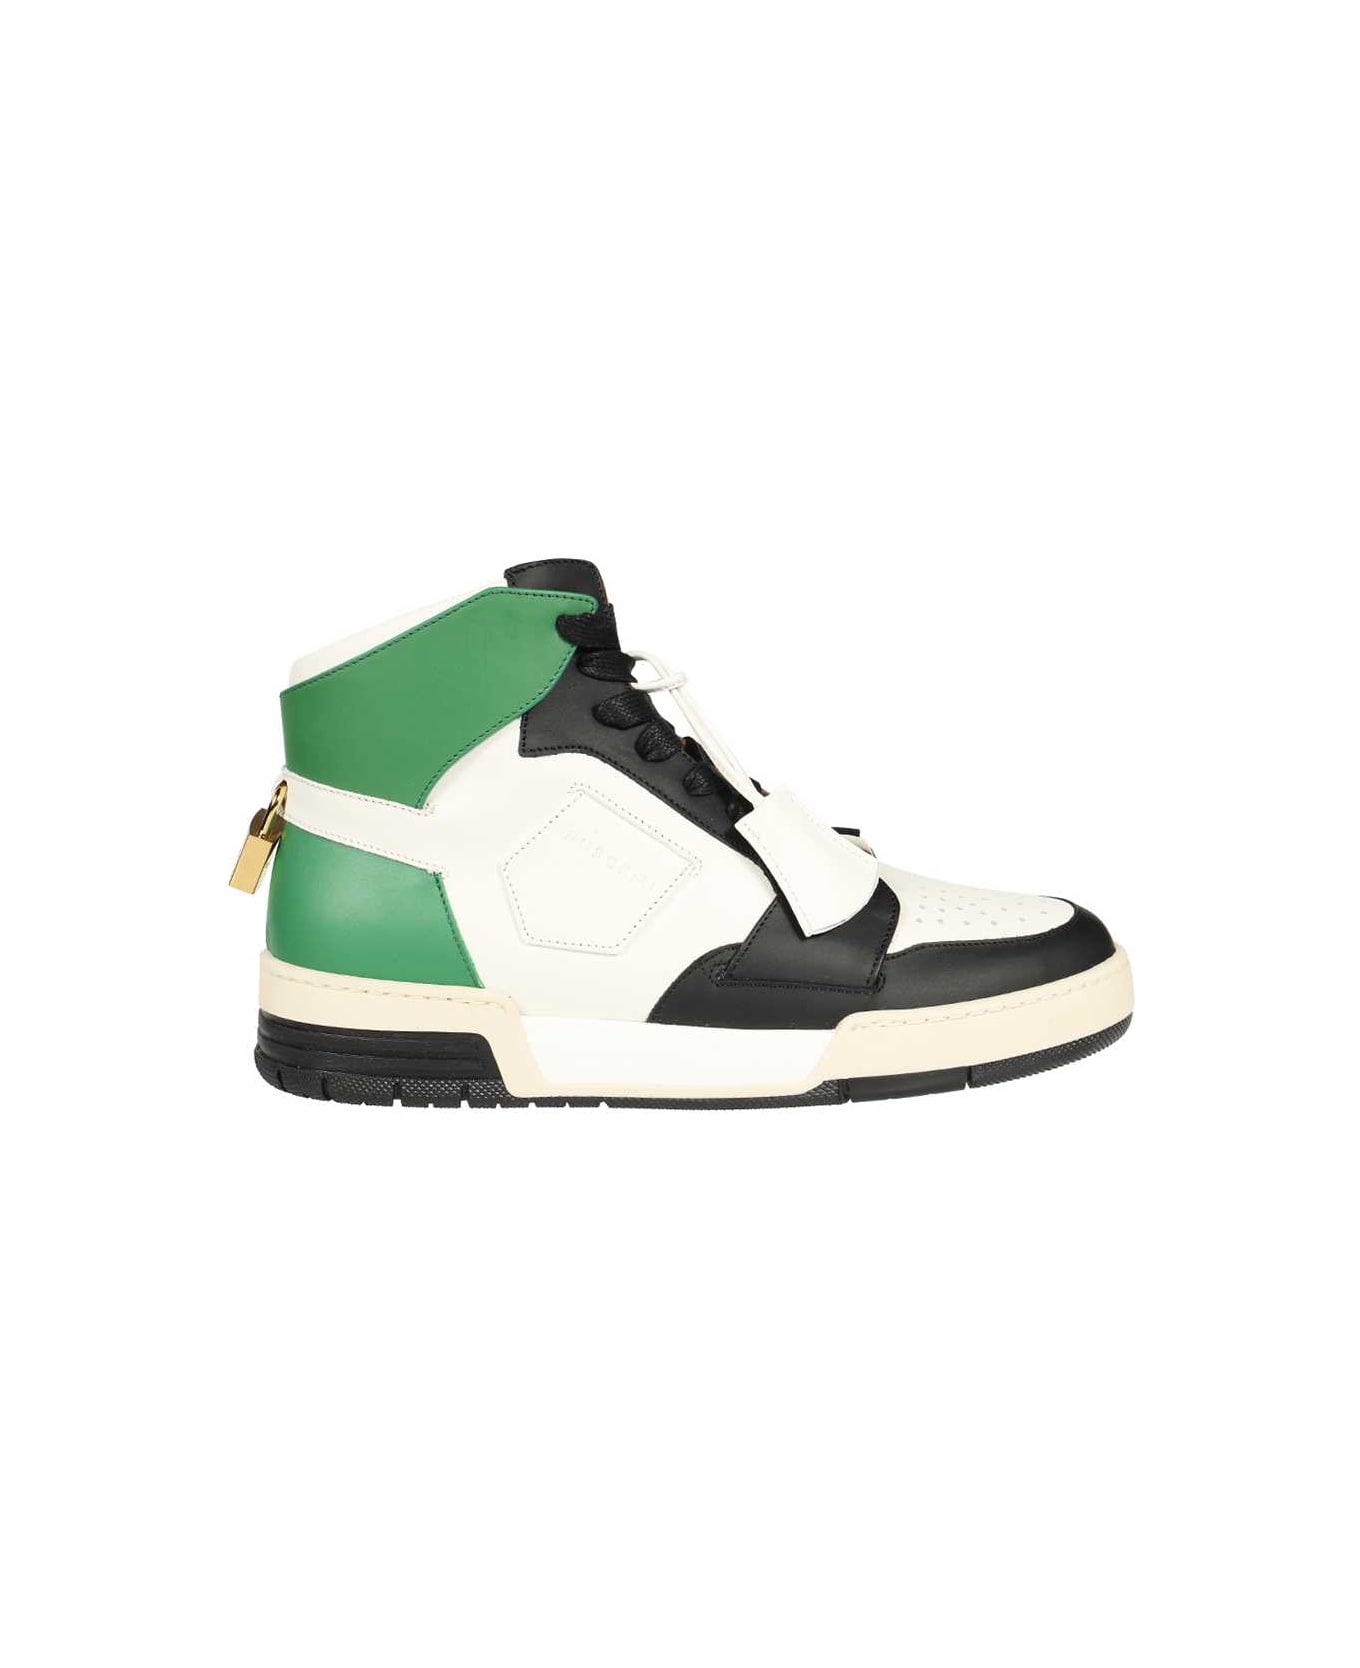 Buscemi Leather High-top Sneakers - green スニーカー